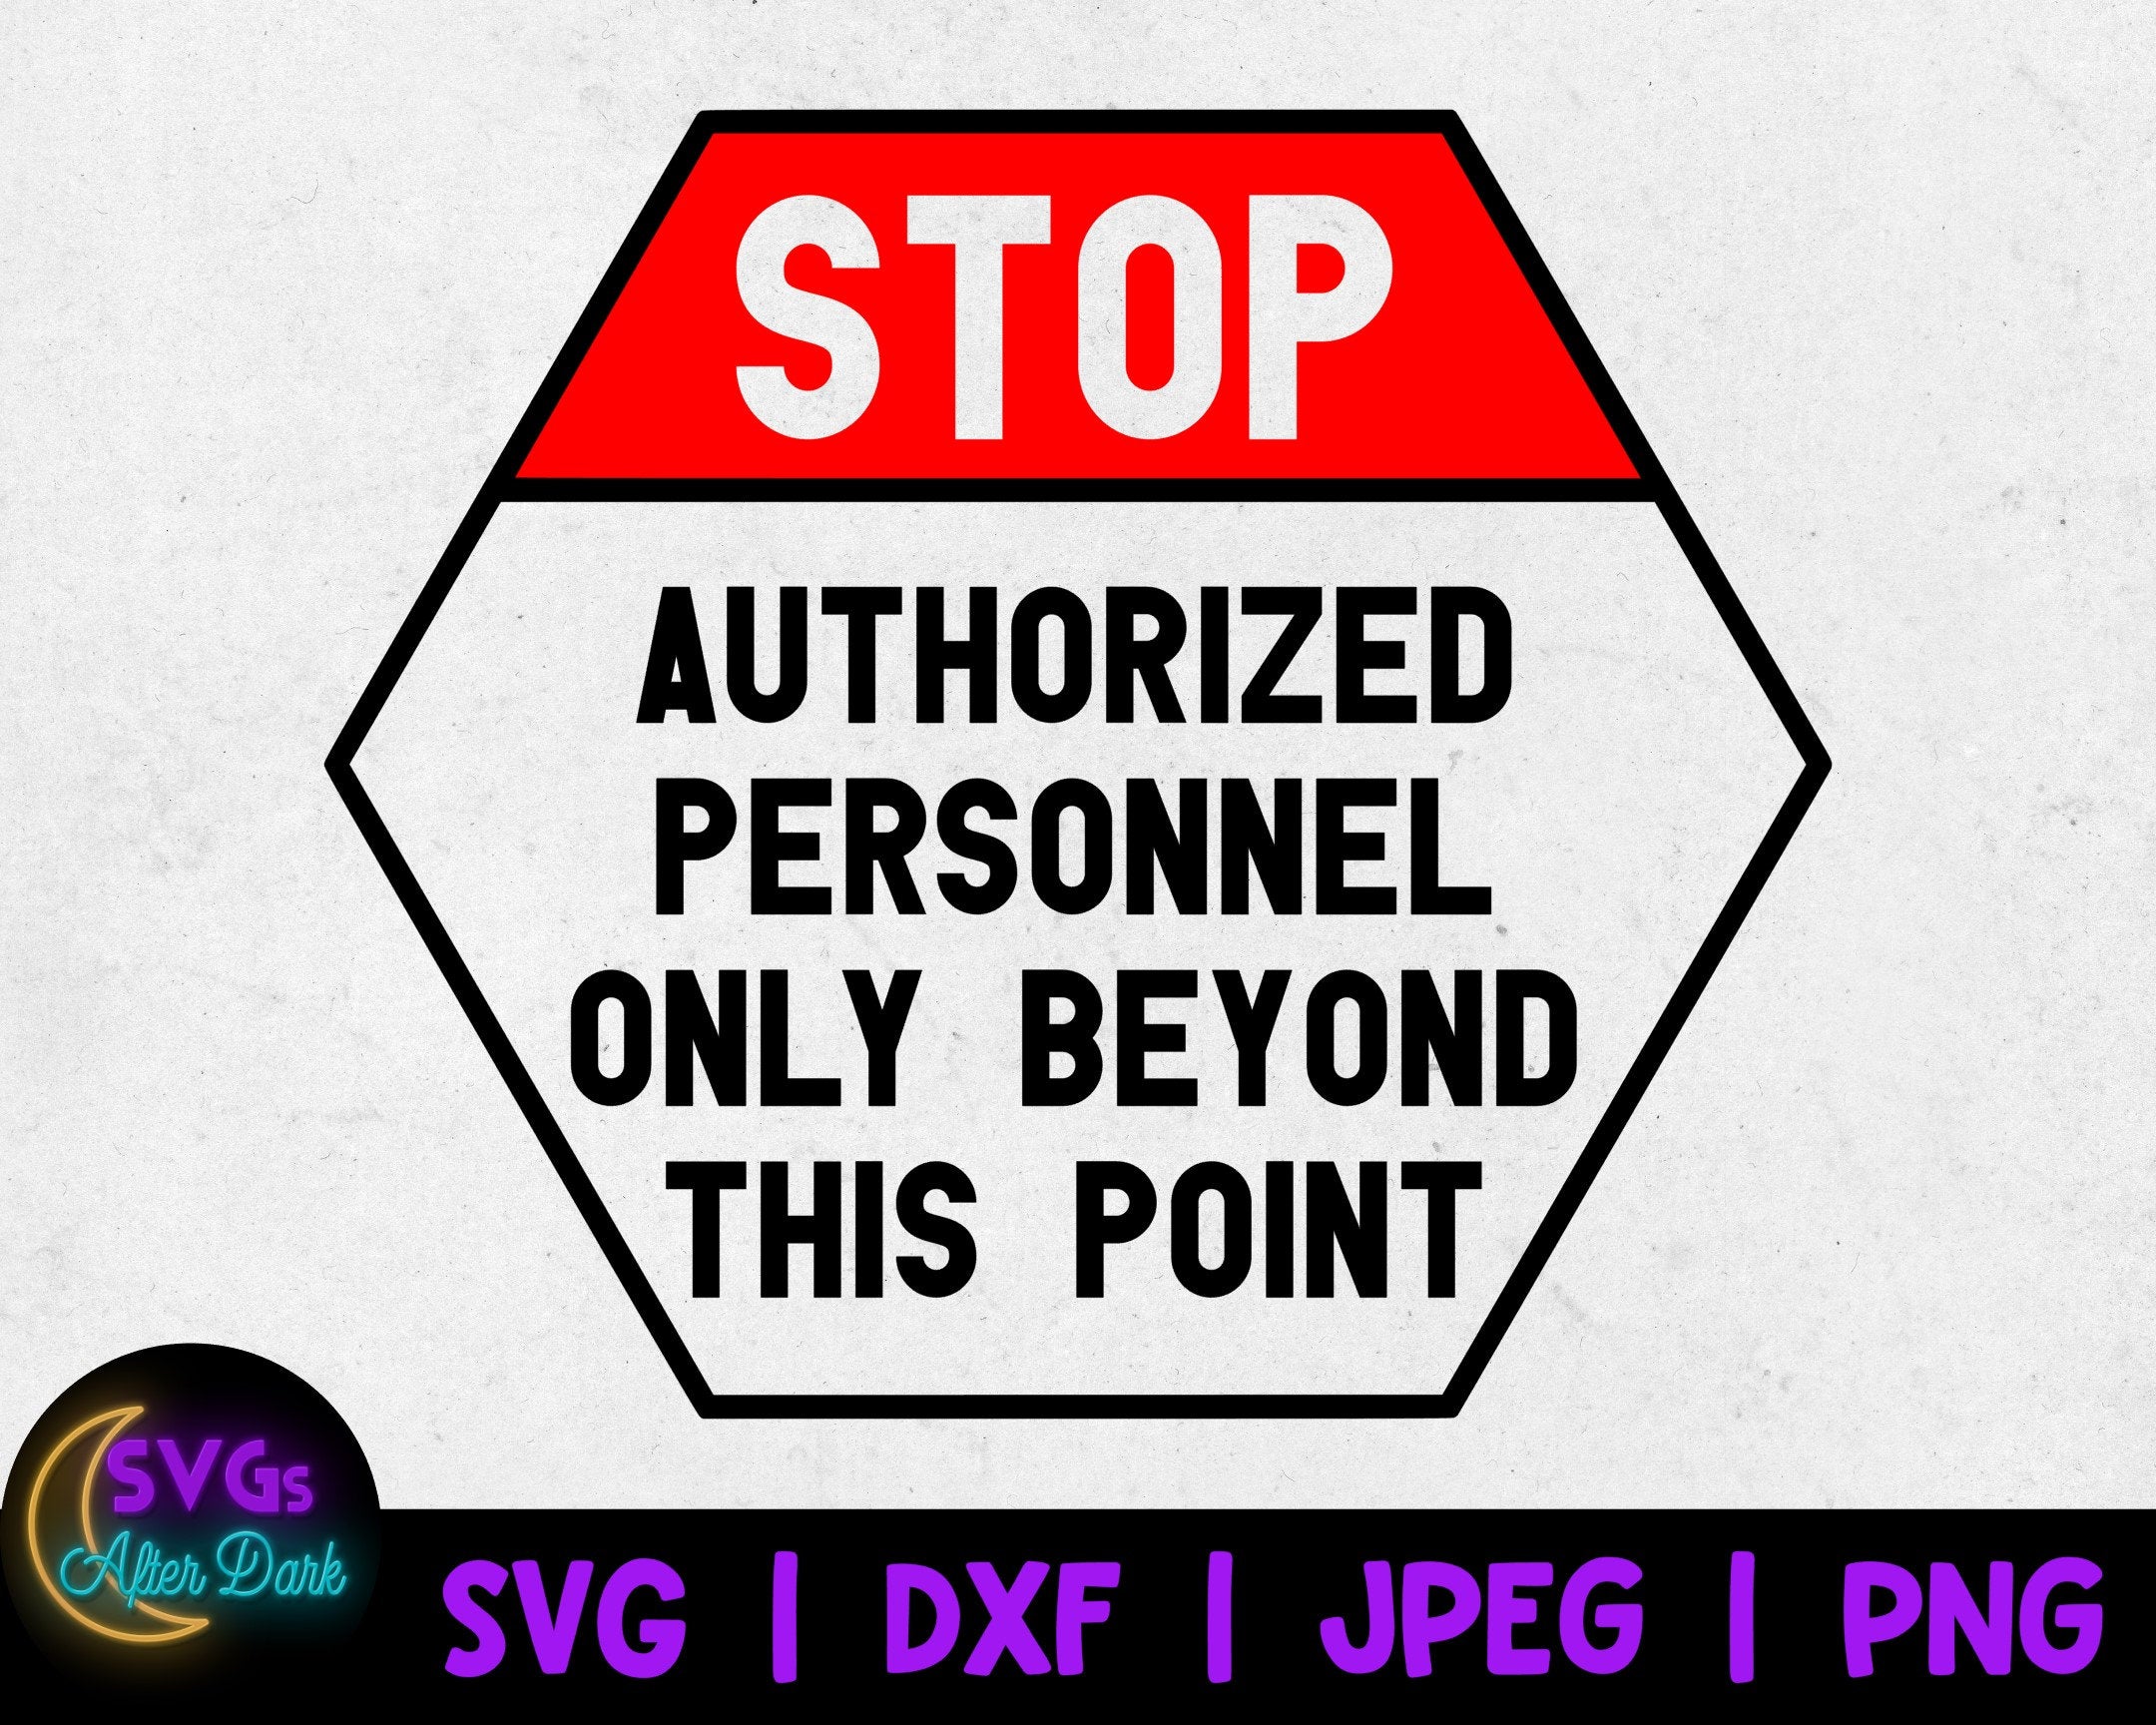 NSFW SVG - Stop Authorized Personnel Only Beyond This Point SVG - Men's Underwear Svg